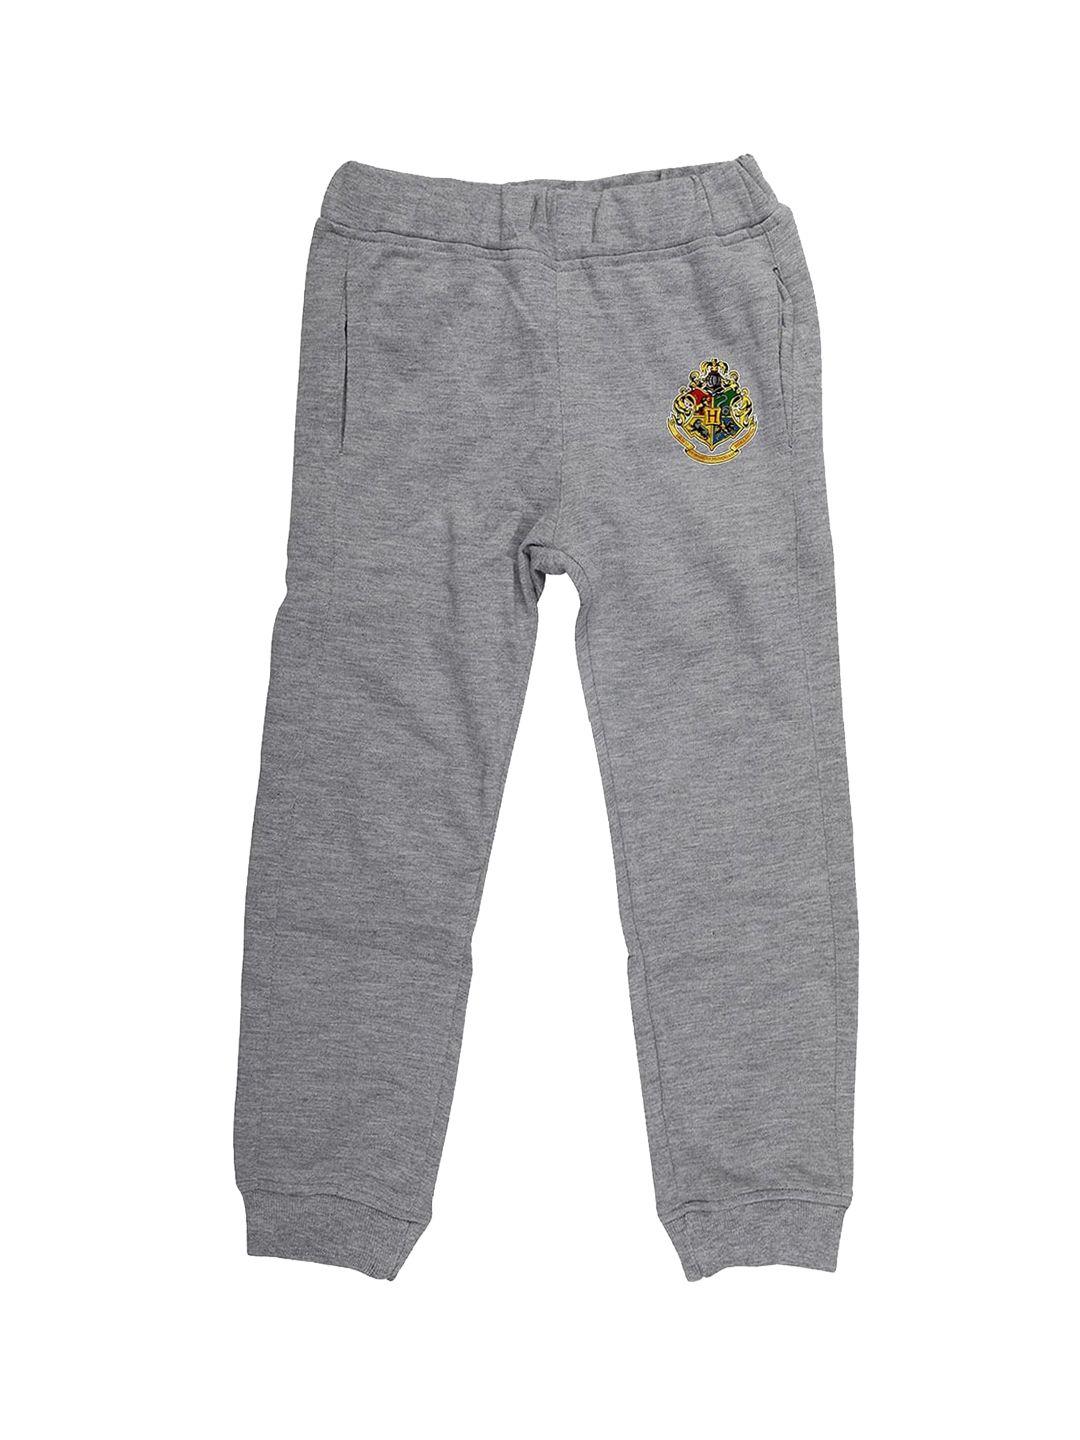 harry potter by wear your mind boys grey solid joggers